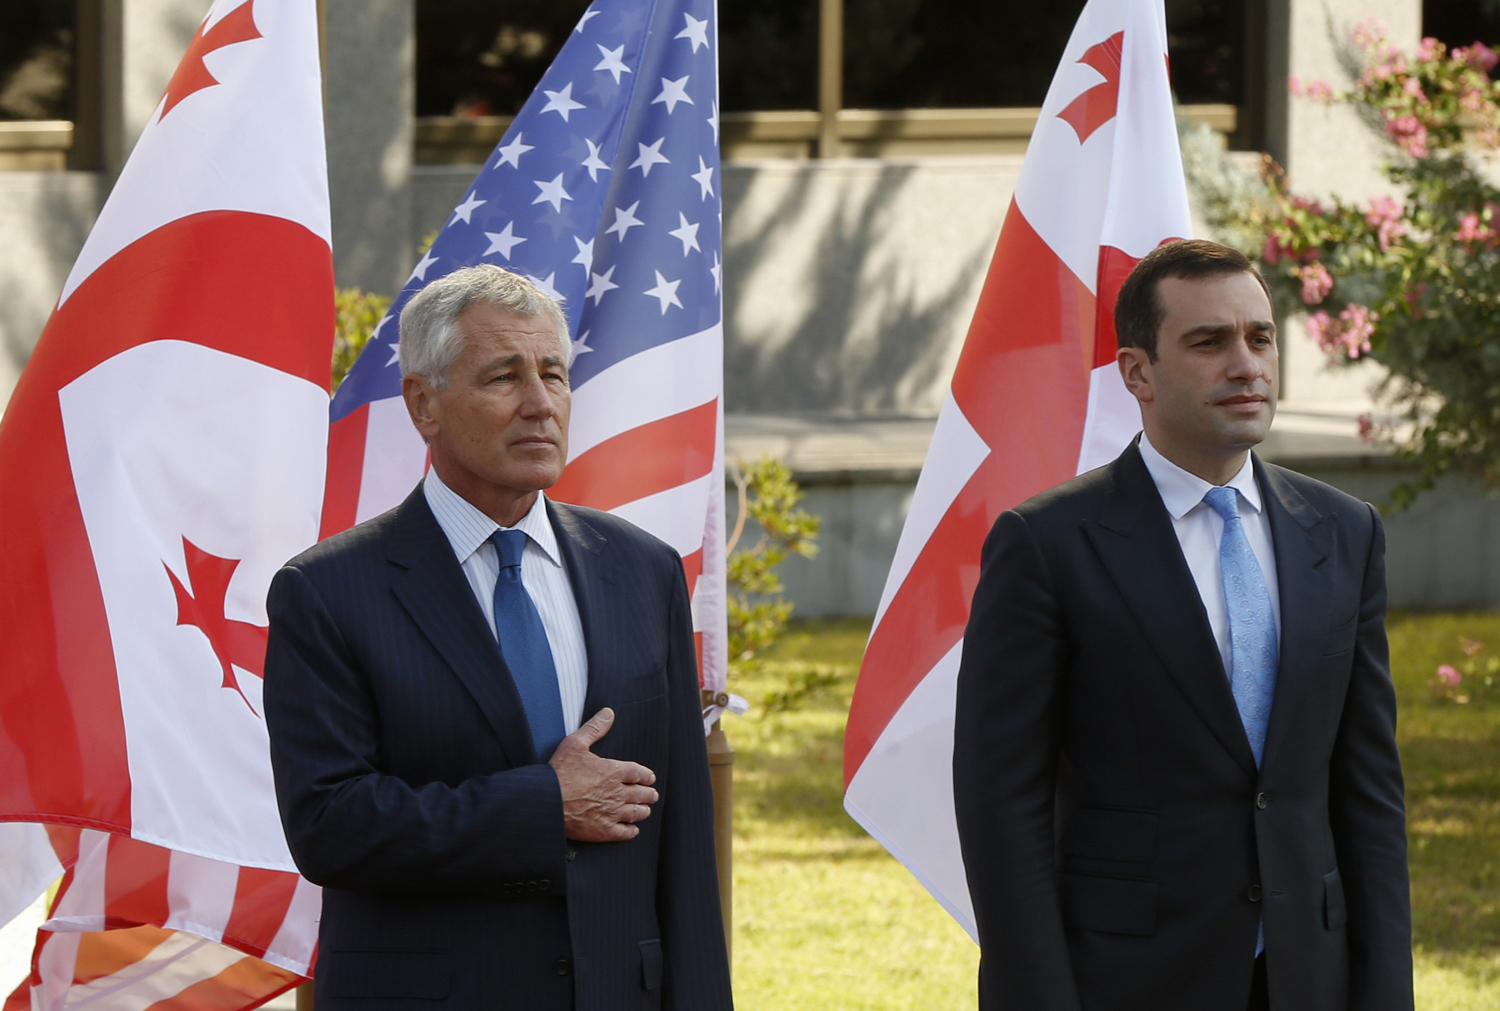 Georgia's Defence Minister Alasania and U.S. Defense Secretary Hagel attend an official welcoming ceremony in Tbilisi